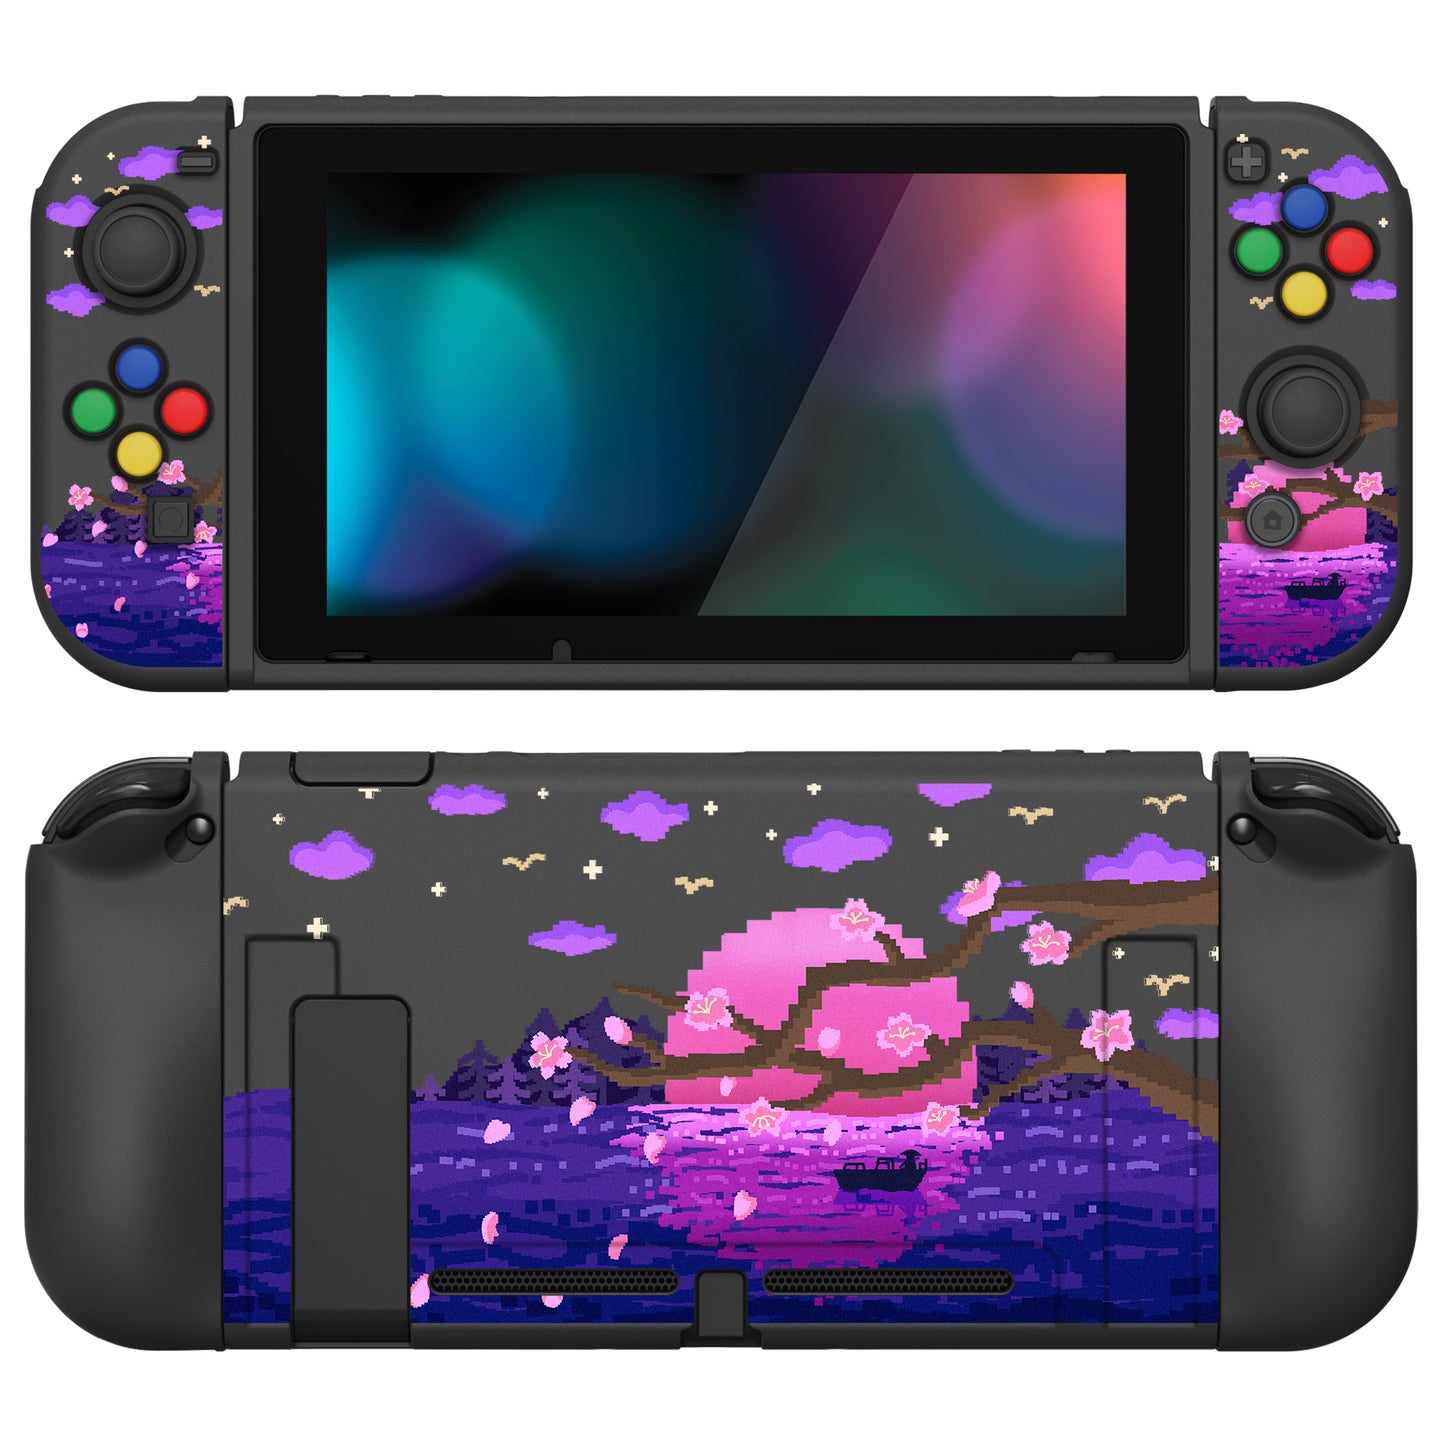 PlayVital ZealProtect Soft Protective Case for Nintendo Switch, Flexible Cover for Switch with Tempered Glass Screen Protector & Thumb Grips & ABXY Direction Button Caps - Pixel Moon Night - RNSYV6023 playvital